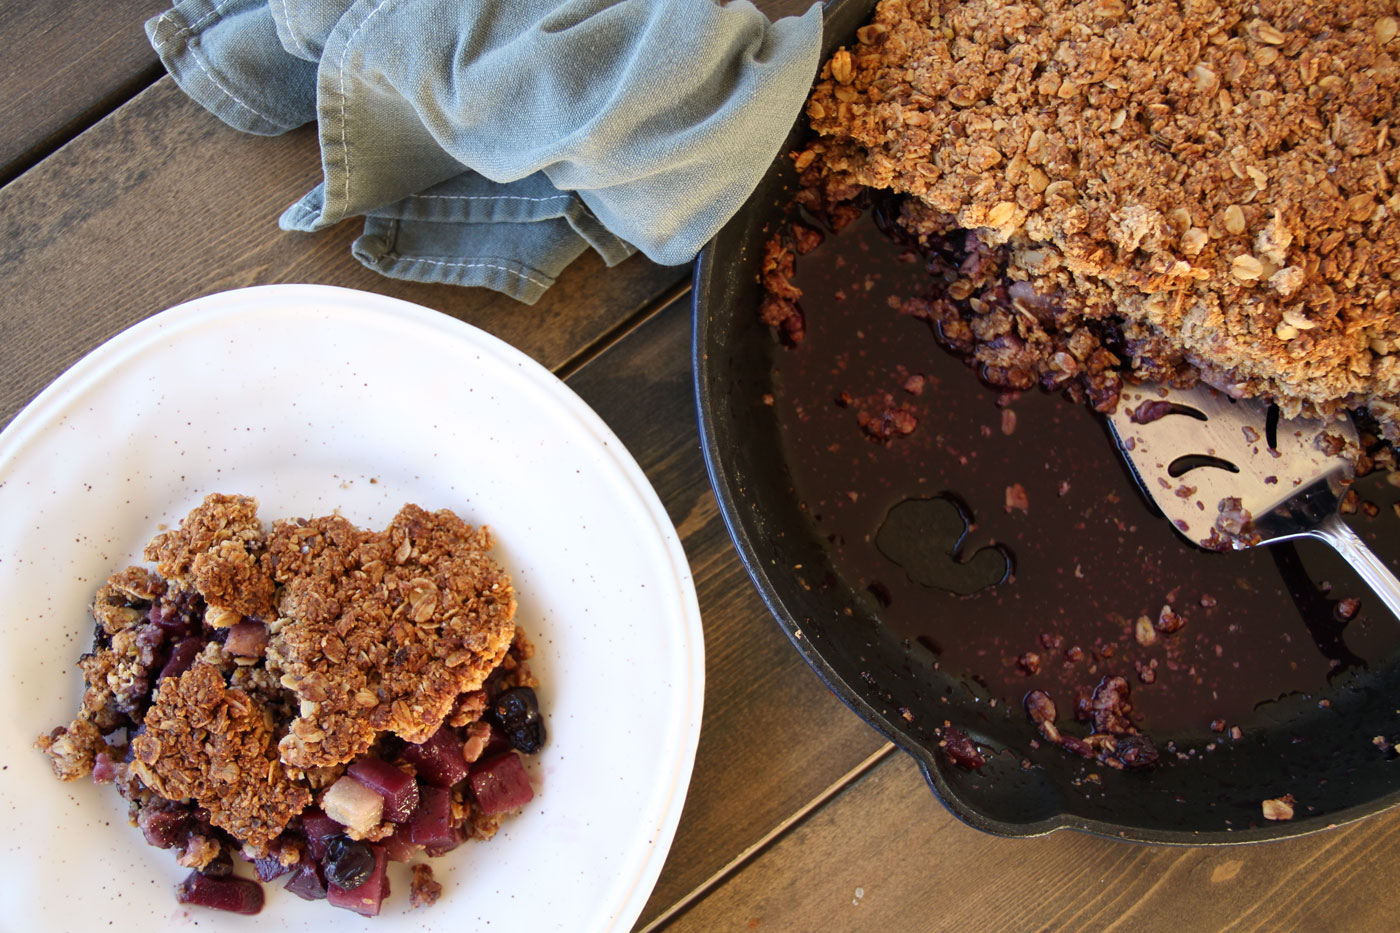 This is a fruit crumble made by Active Vegetarian